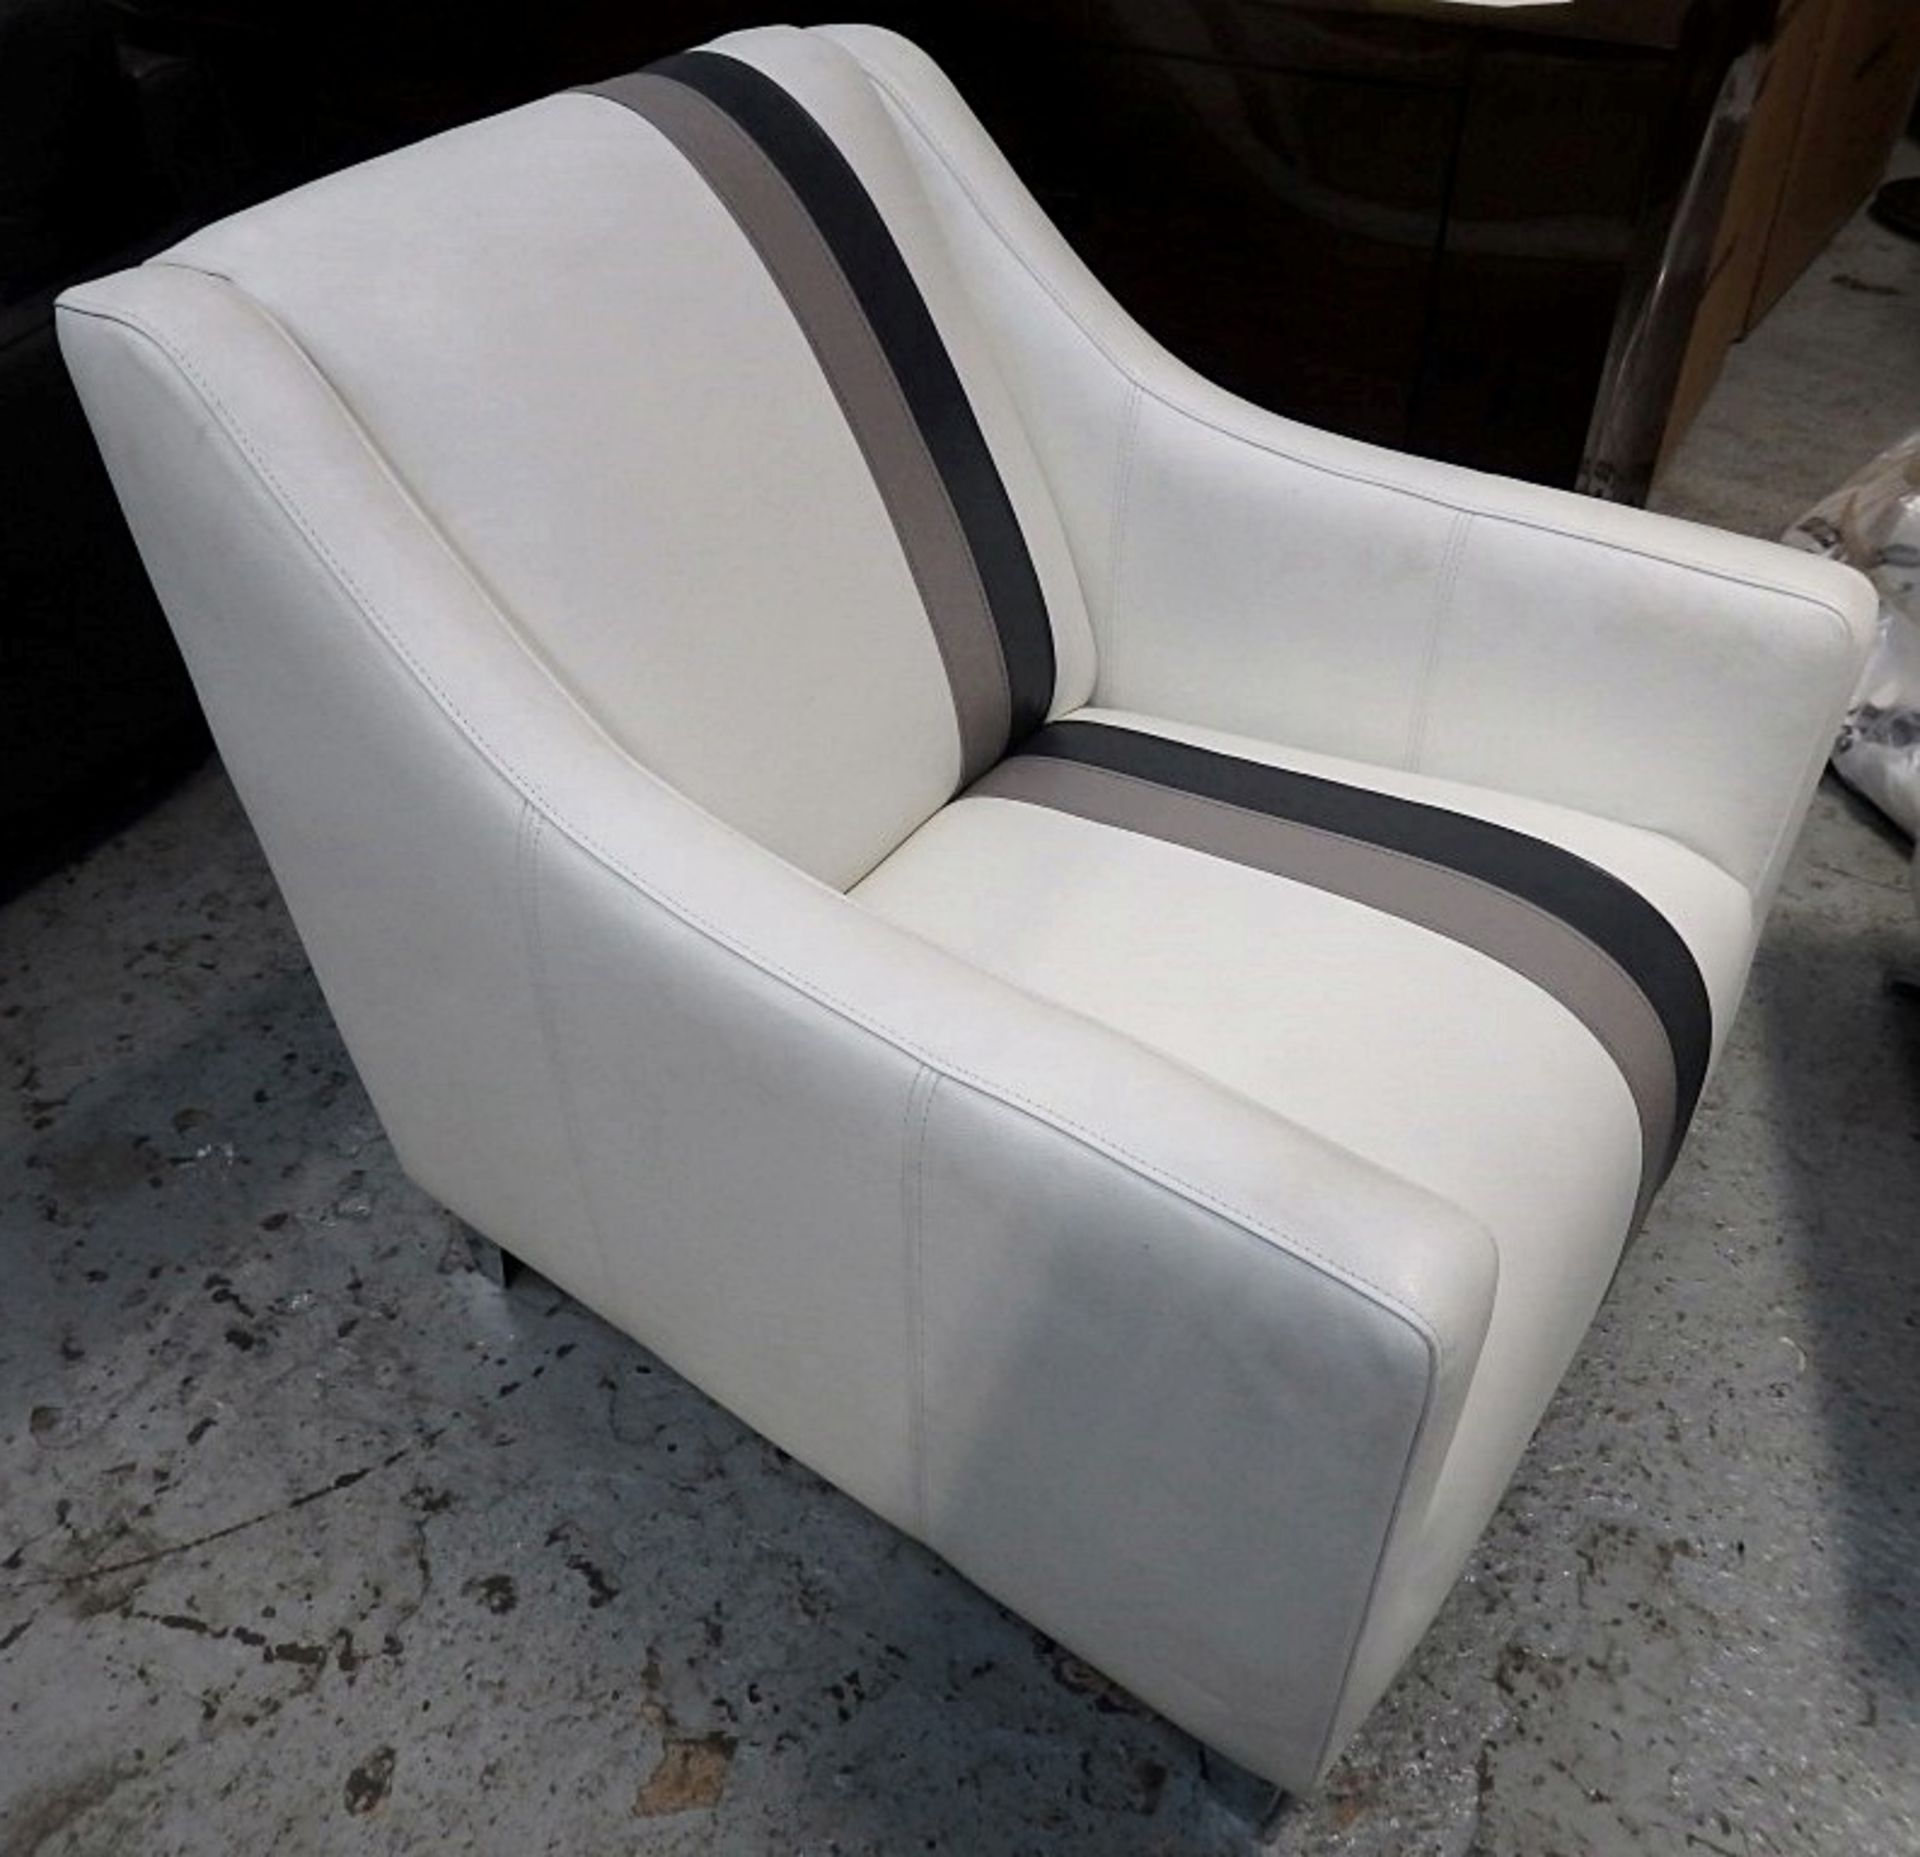 1 x Cream Leather Chair - Features Fendi-style Design With A 2-Tone Grey Stripe - L75x90x80cm - - Image 4 of 4